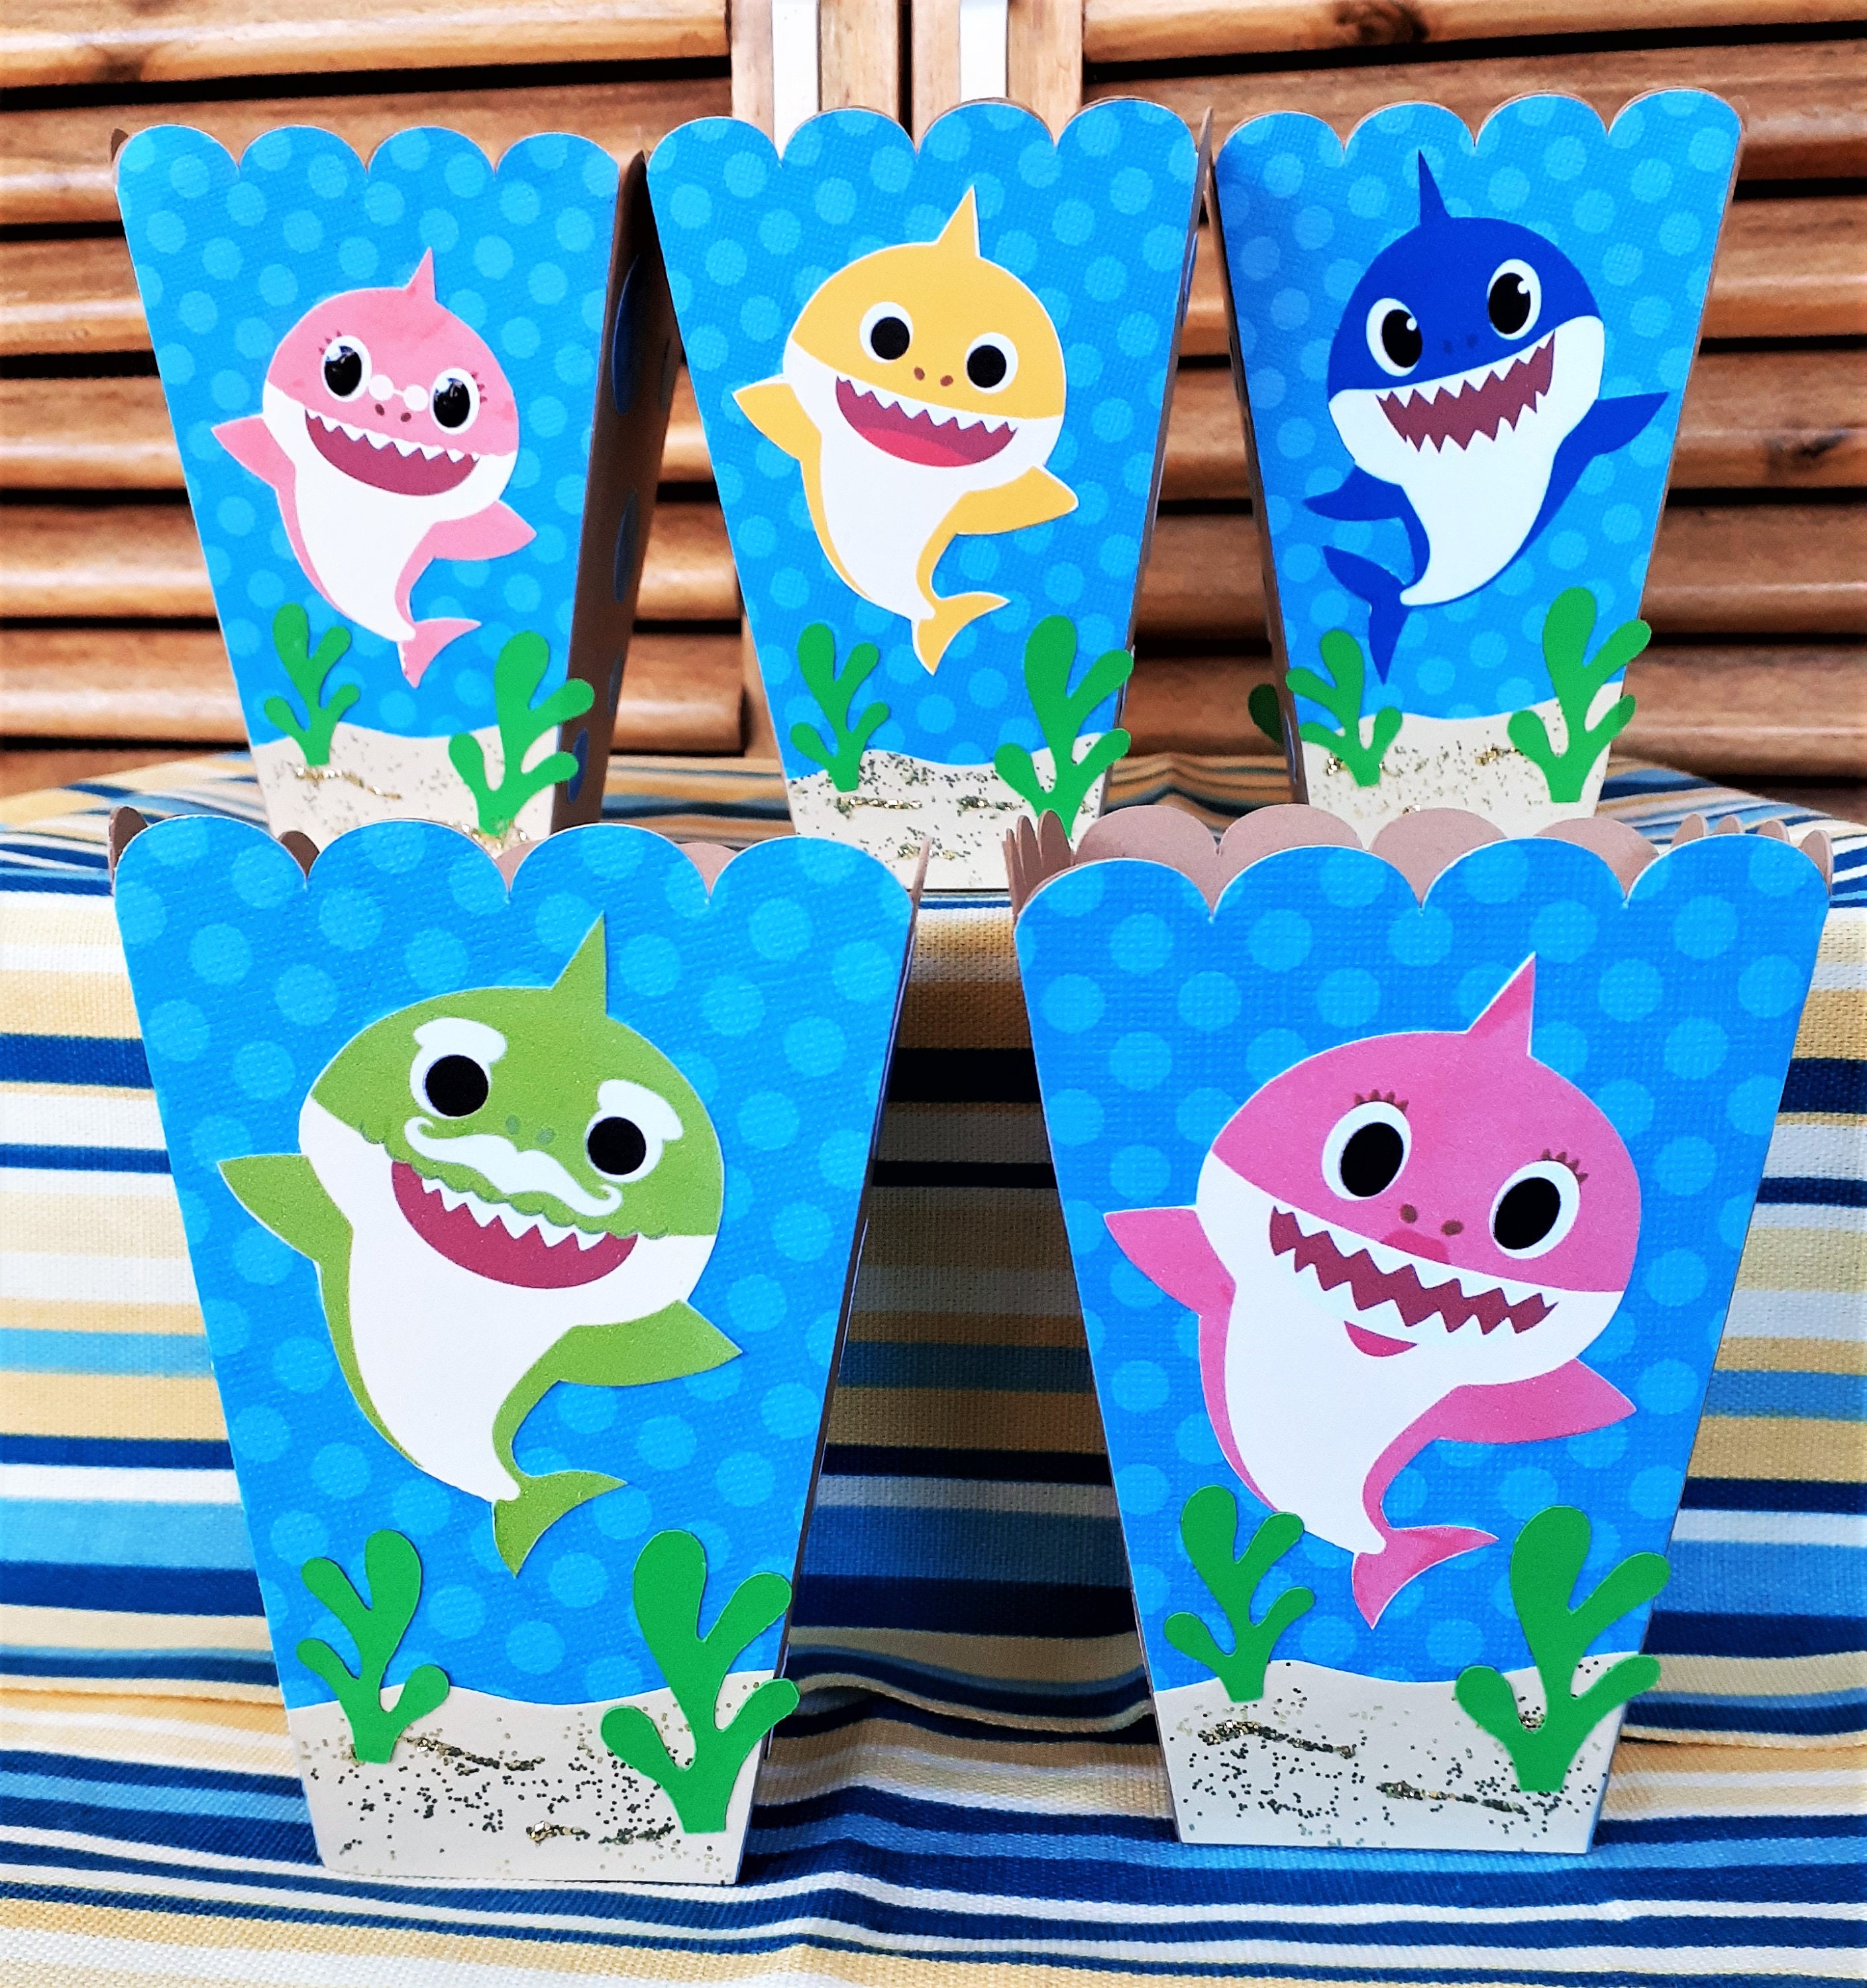 12 Pack Shark Baby Gift Bags  Candy Box Party Gift Boxes for Kids Baby  Shower Birthday Party Decorations Supplies price in Saudi Arabia  Amazon  Saudi Arabia  supermarket kanbkam